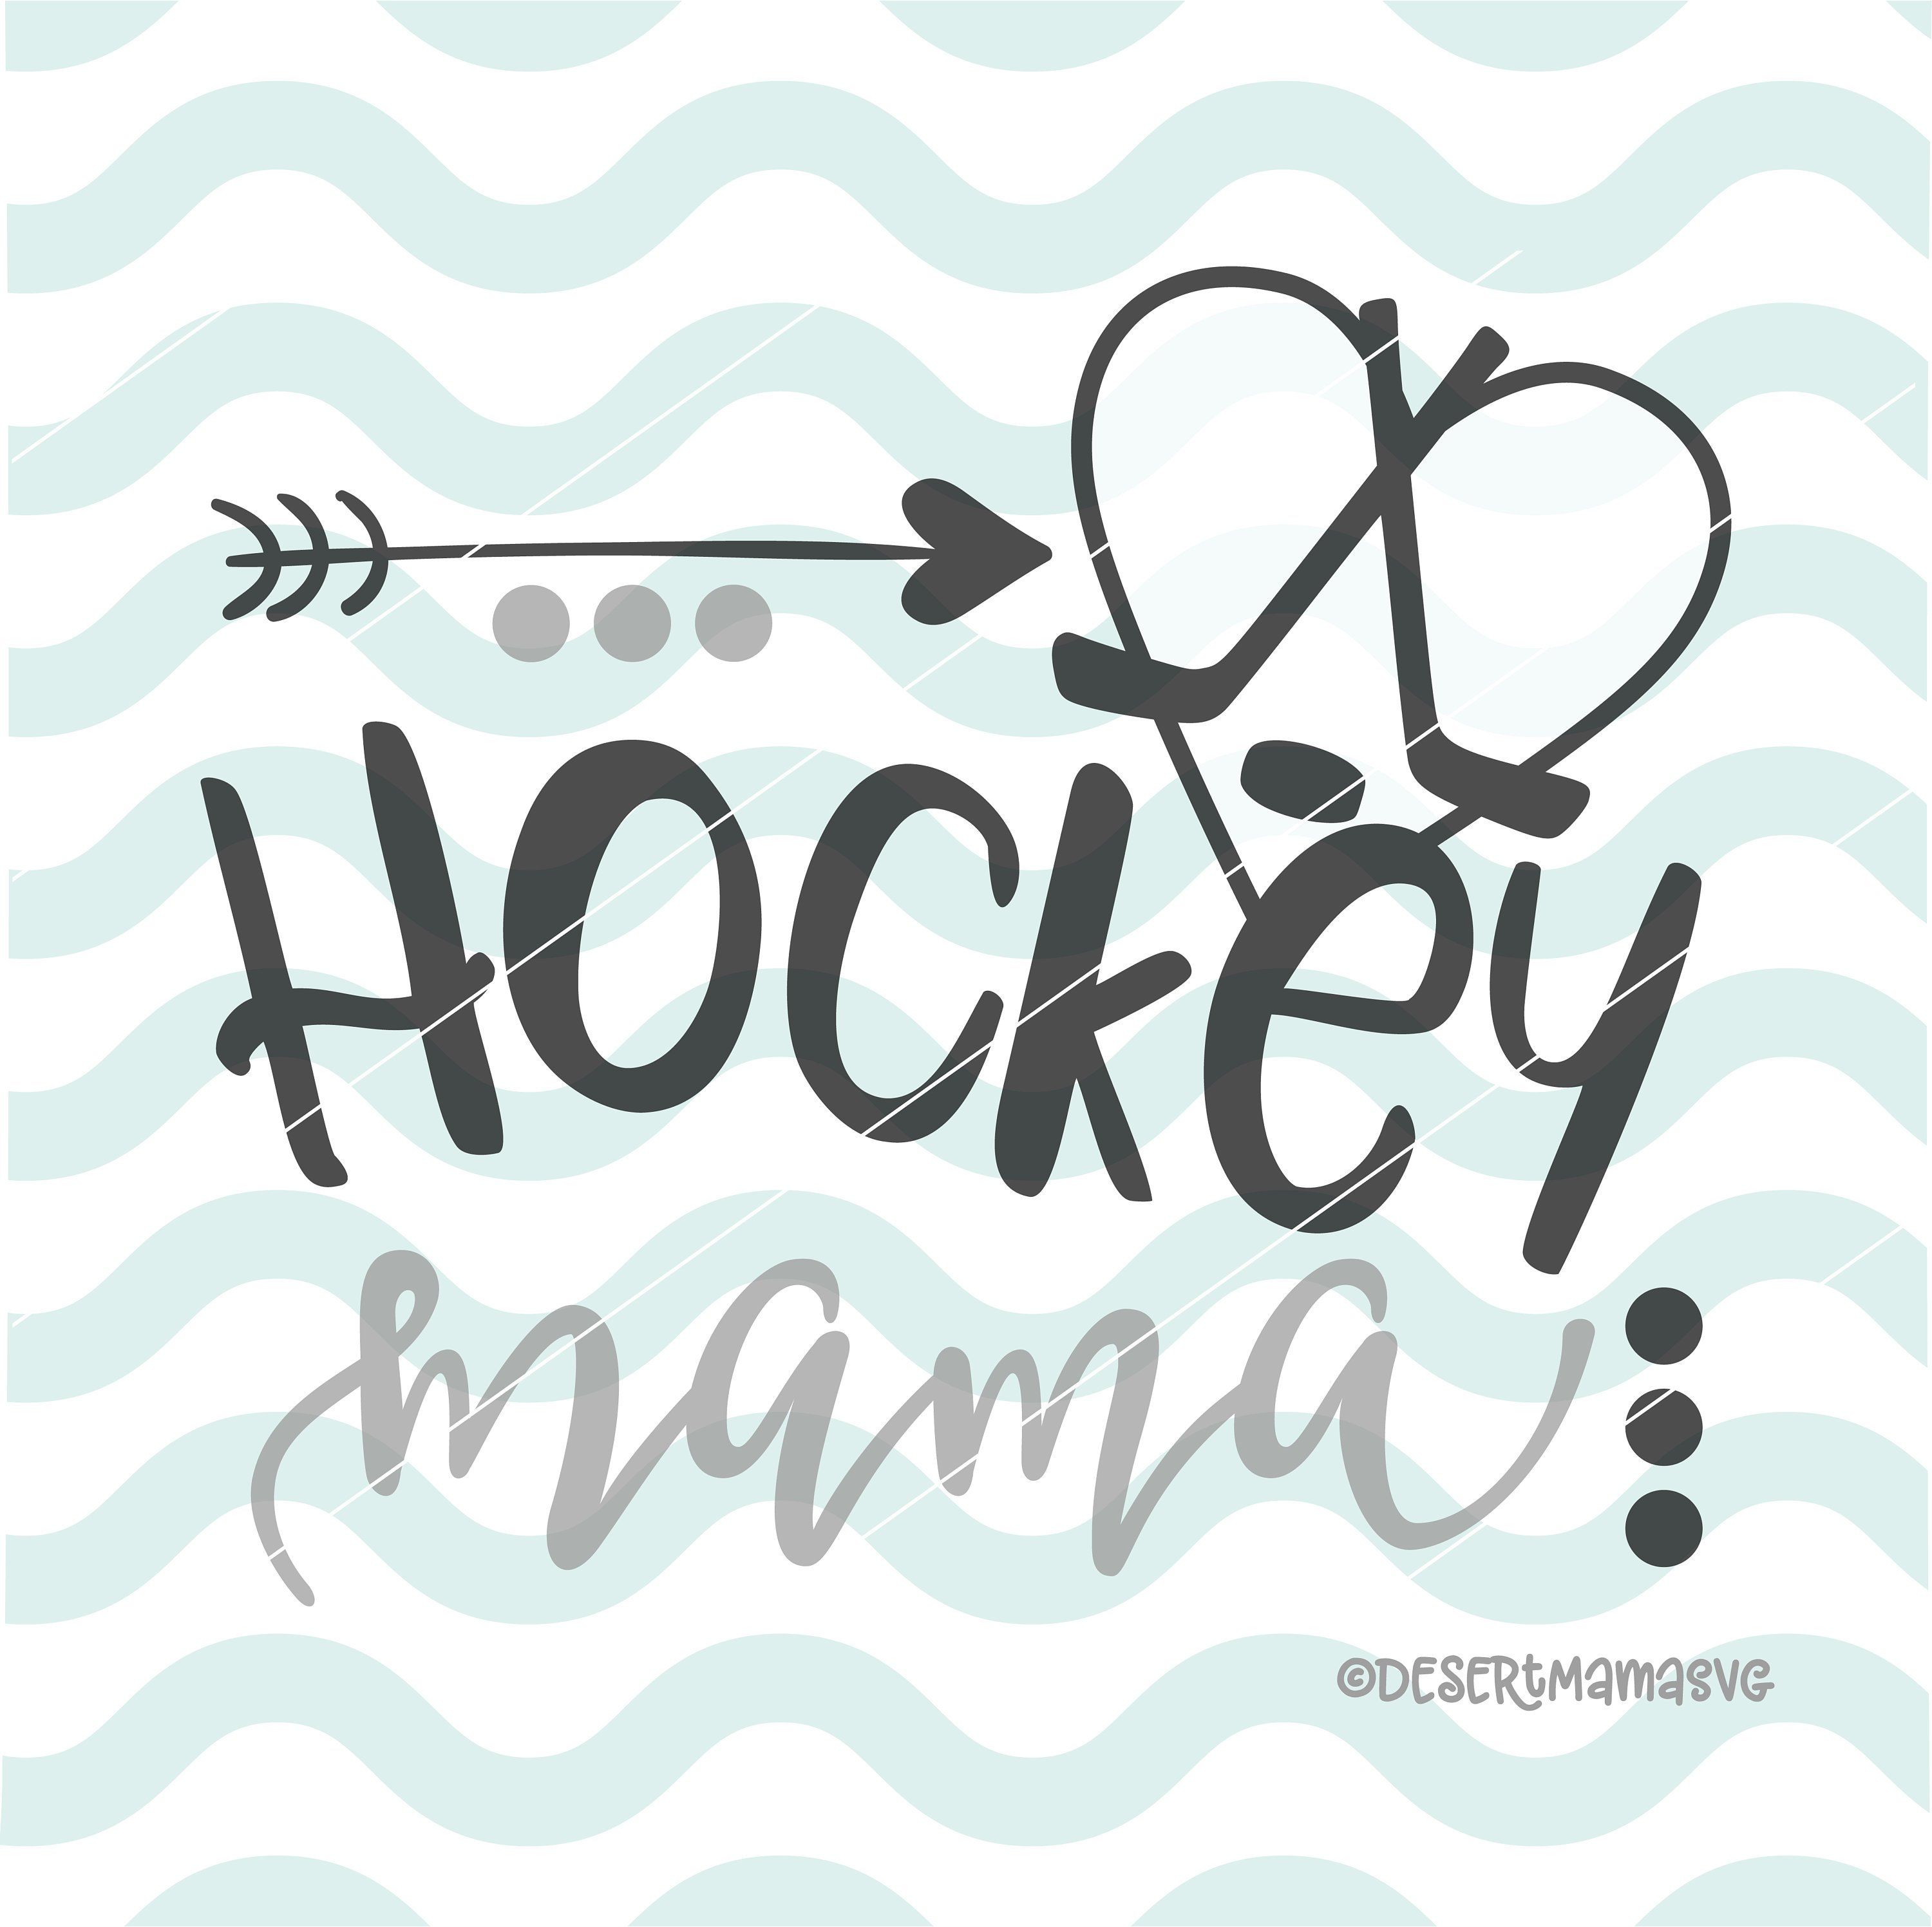 Download Hockey clipart hockey mom, Hockey hockey mom Transparent FREE for download on WebStockReview 2020